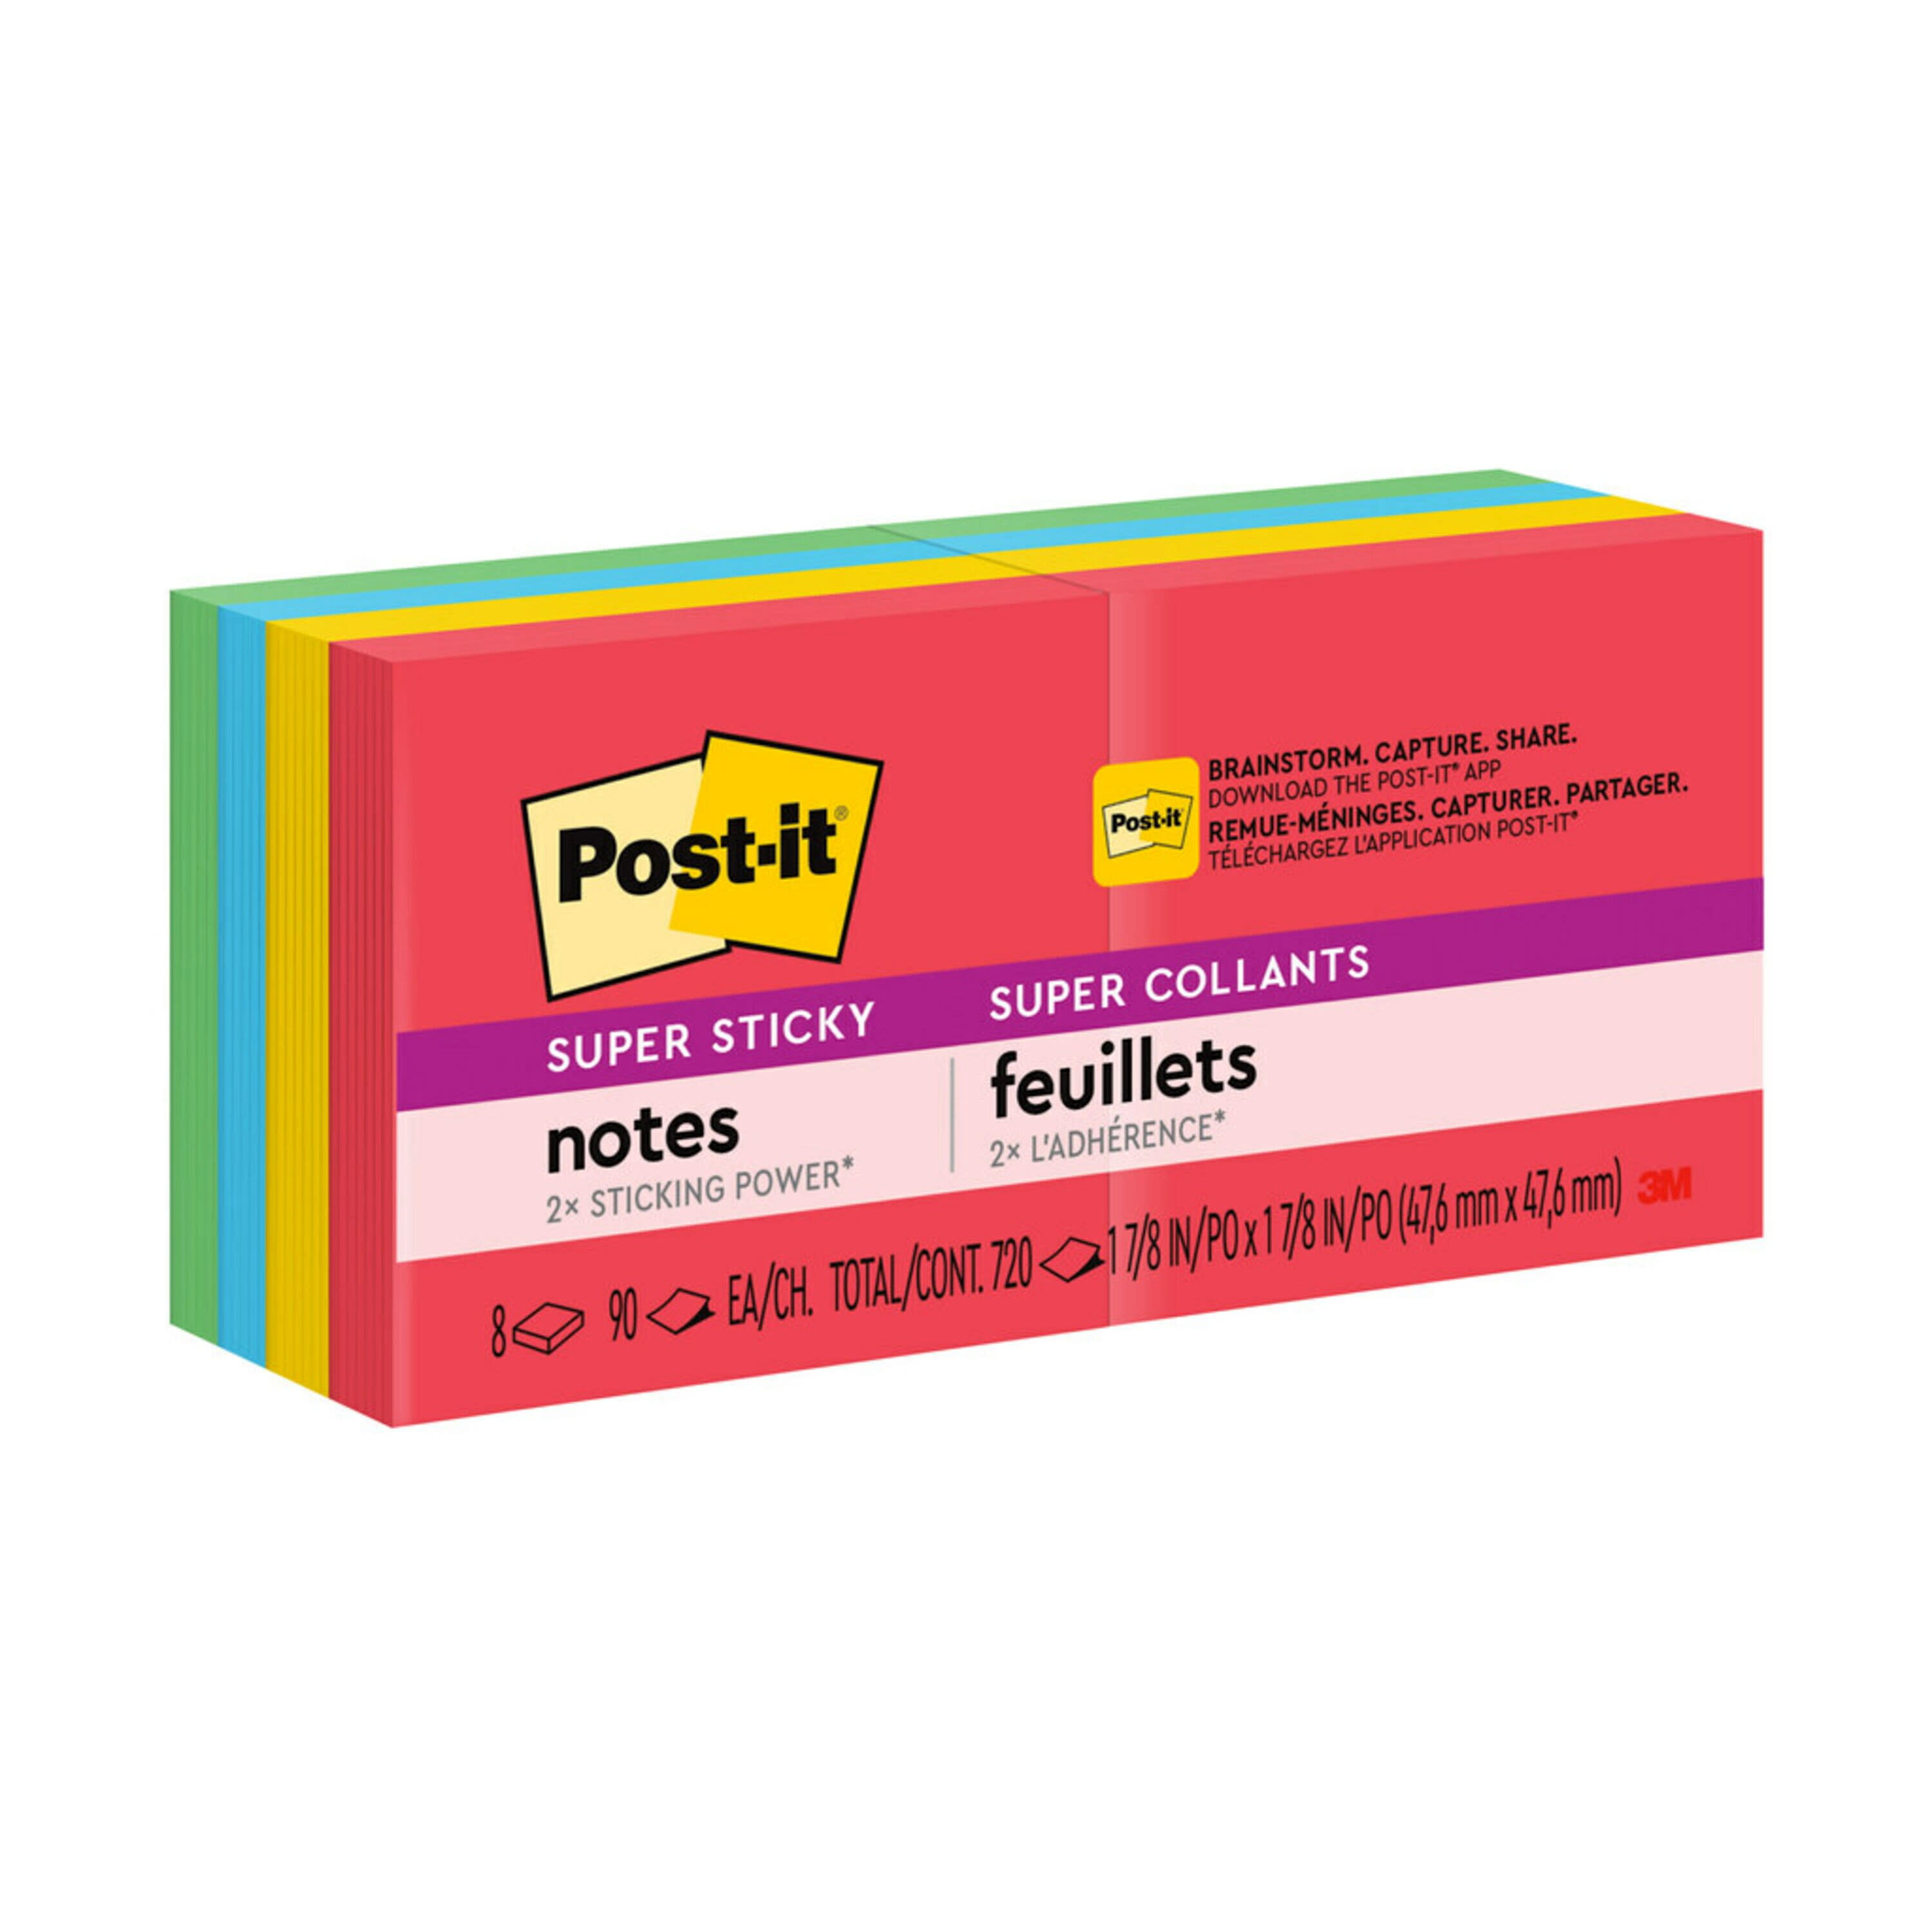 Notes Super Sticky Carnival 76 x 76 mm Post It - Intermarché